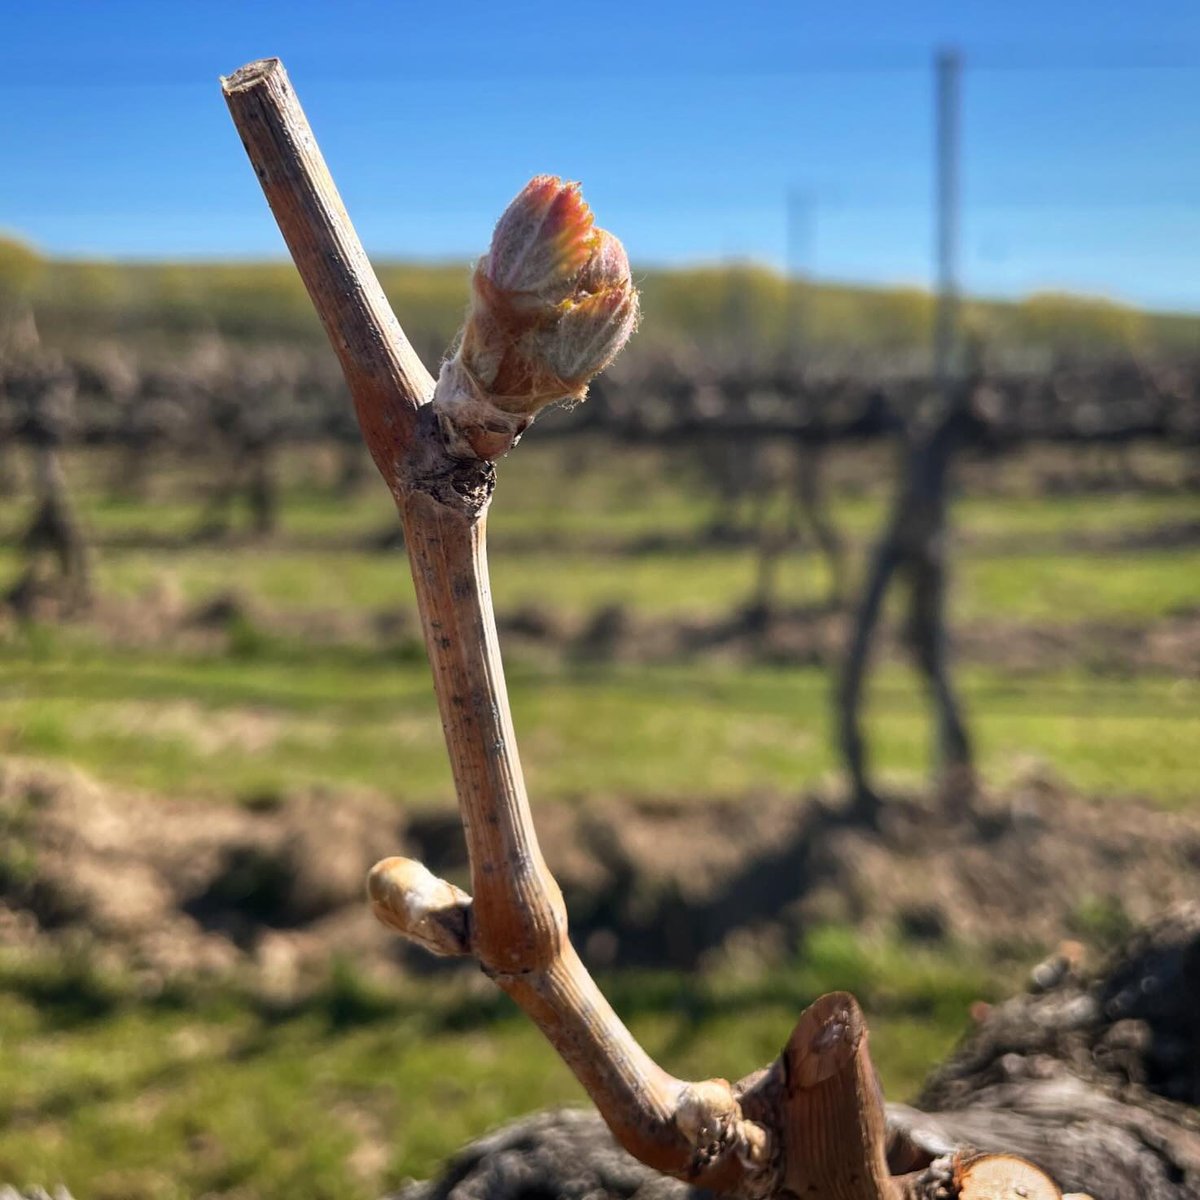 #Budbreak is an exciting time in the vineyards! It signals the start of the #growing season & happens early to mid April for #WAwine. We're seeing lots of bud break in our #EasternWashington #vineyards!